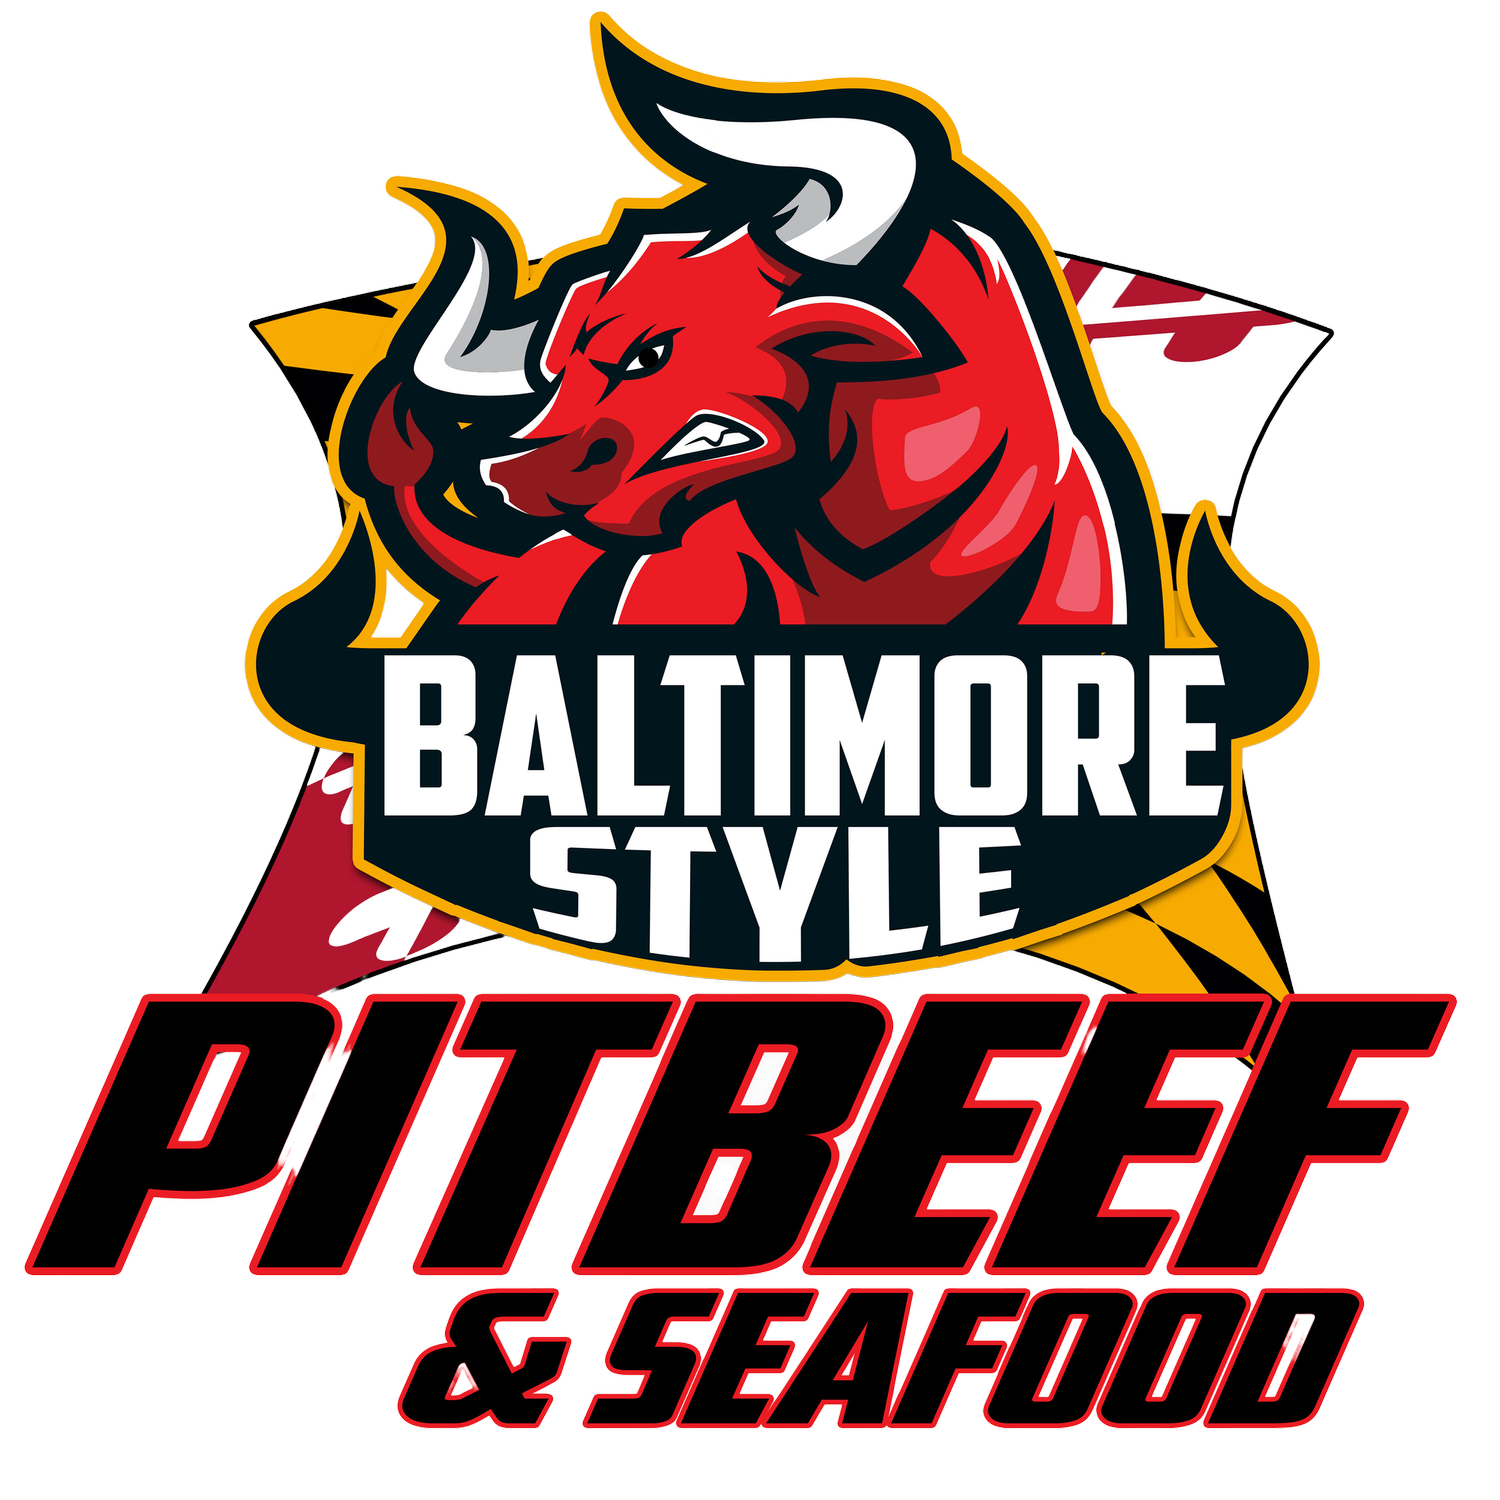 BALTIMORE STYLE PIT BEEF AND SEAFOOD